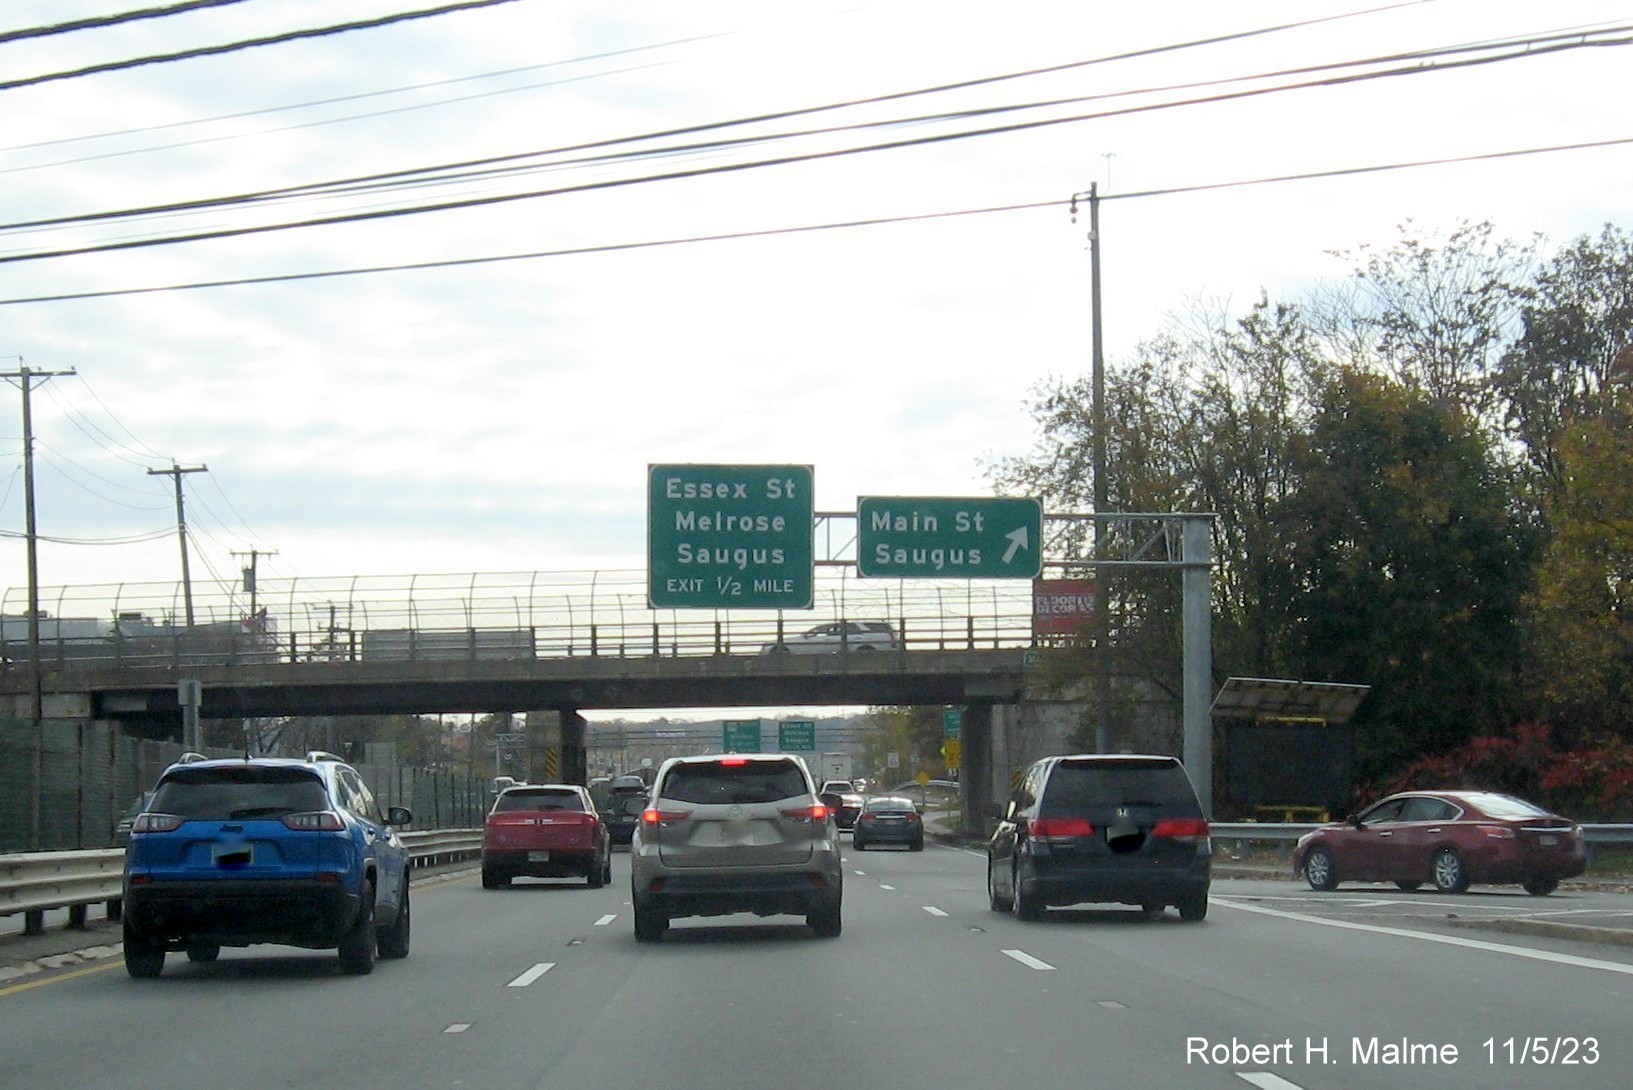 Image of recently placed right side Main Street exit sign and 1/2 mile advance overhead sign for 
        the Essex Street exit on US 1 South in Saugus, November 2023